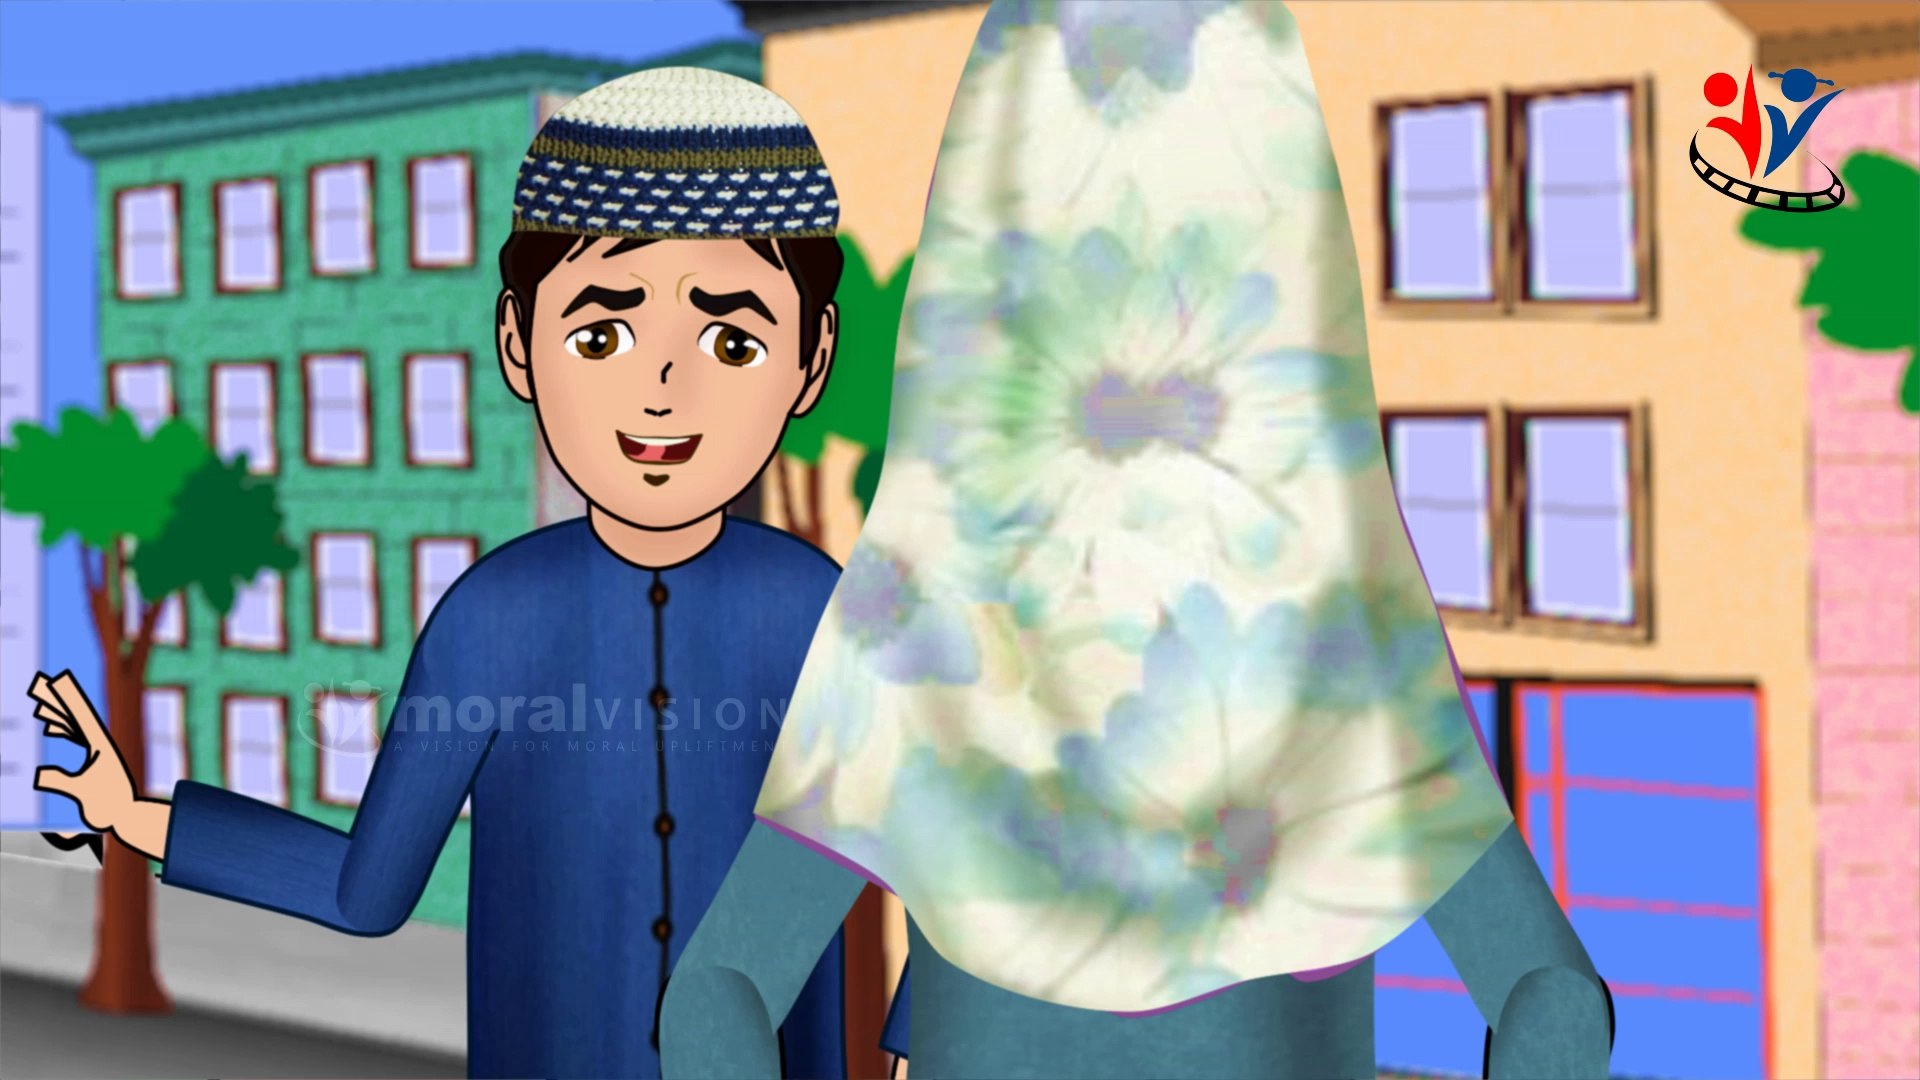 Spitting Anywhere - Cleanliness Cartoon for Children - Abdul Bari Series -  video Dailymotion